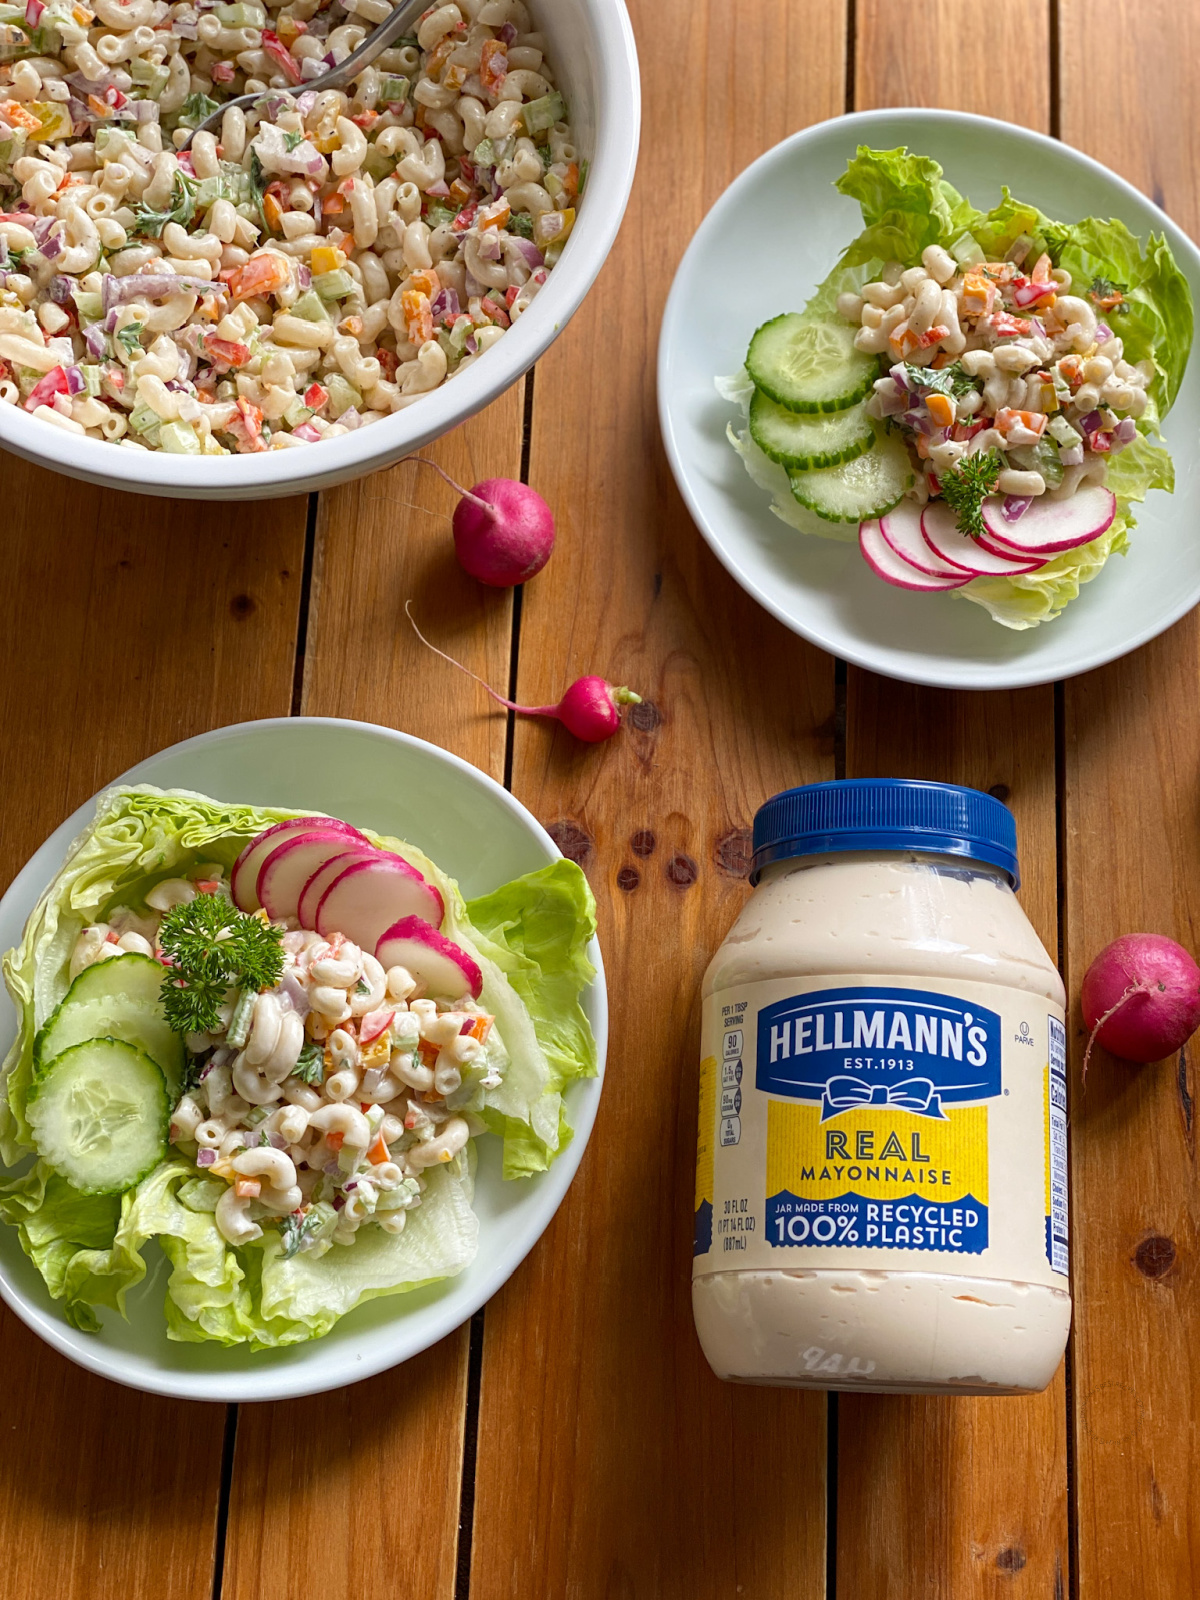 Mexican-style macaroni salad made with Hellman's mayonnaise